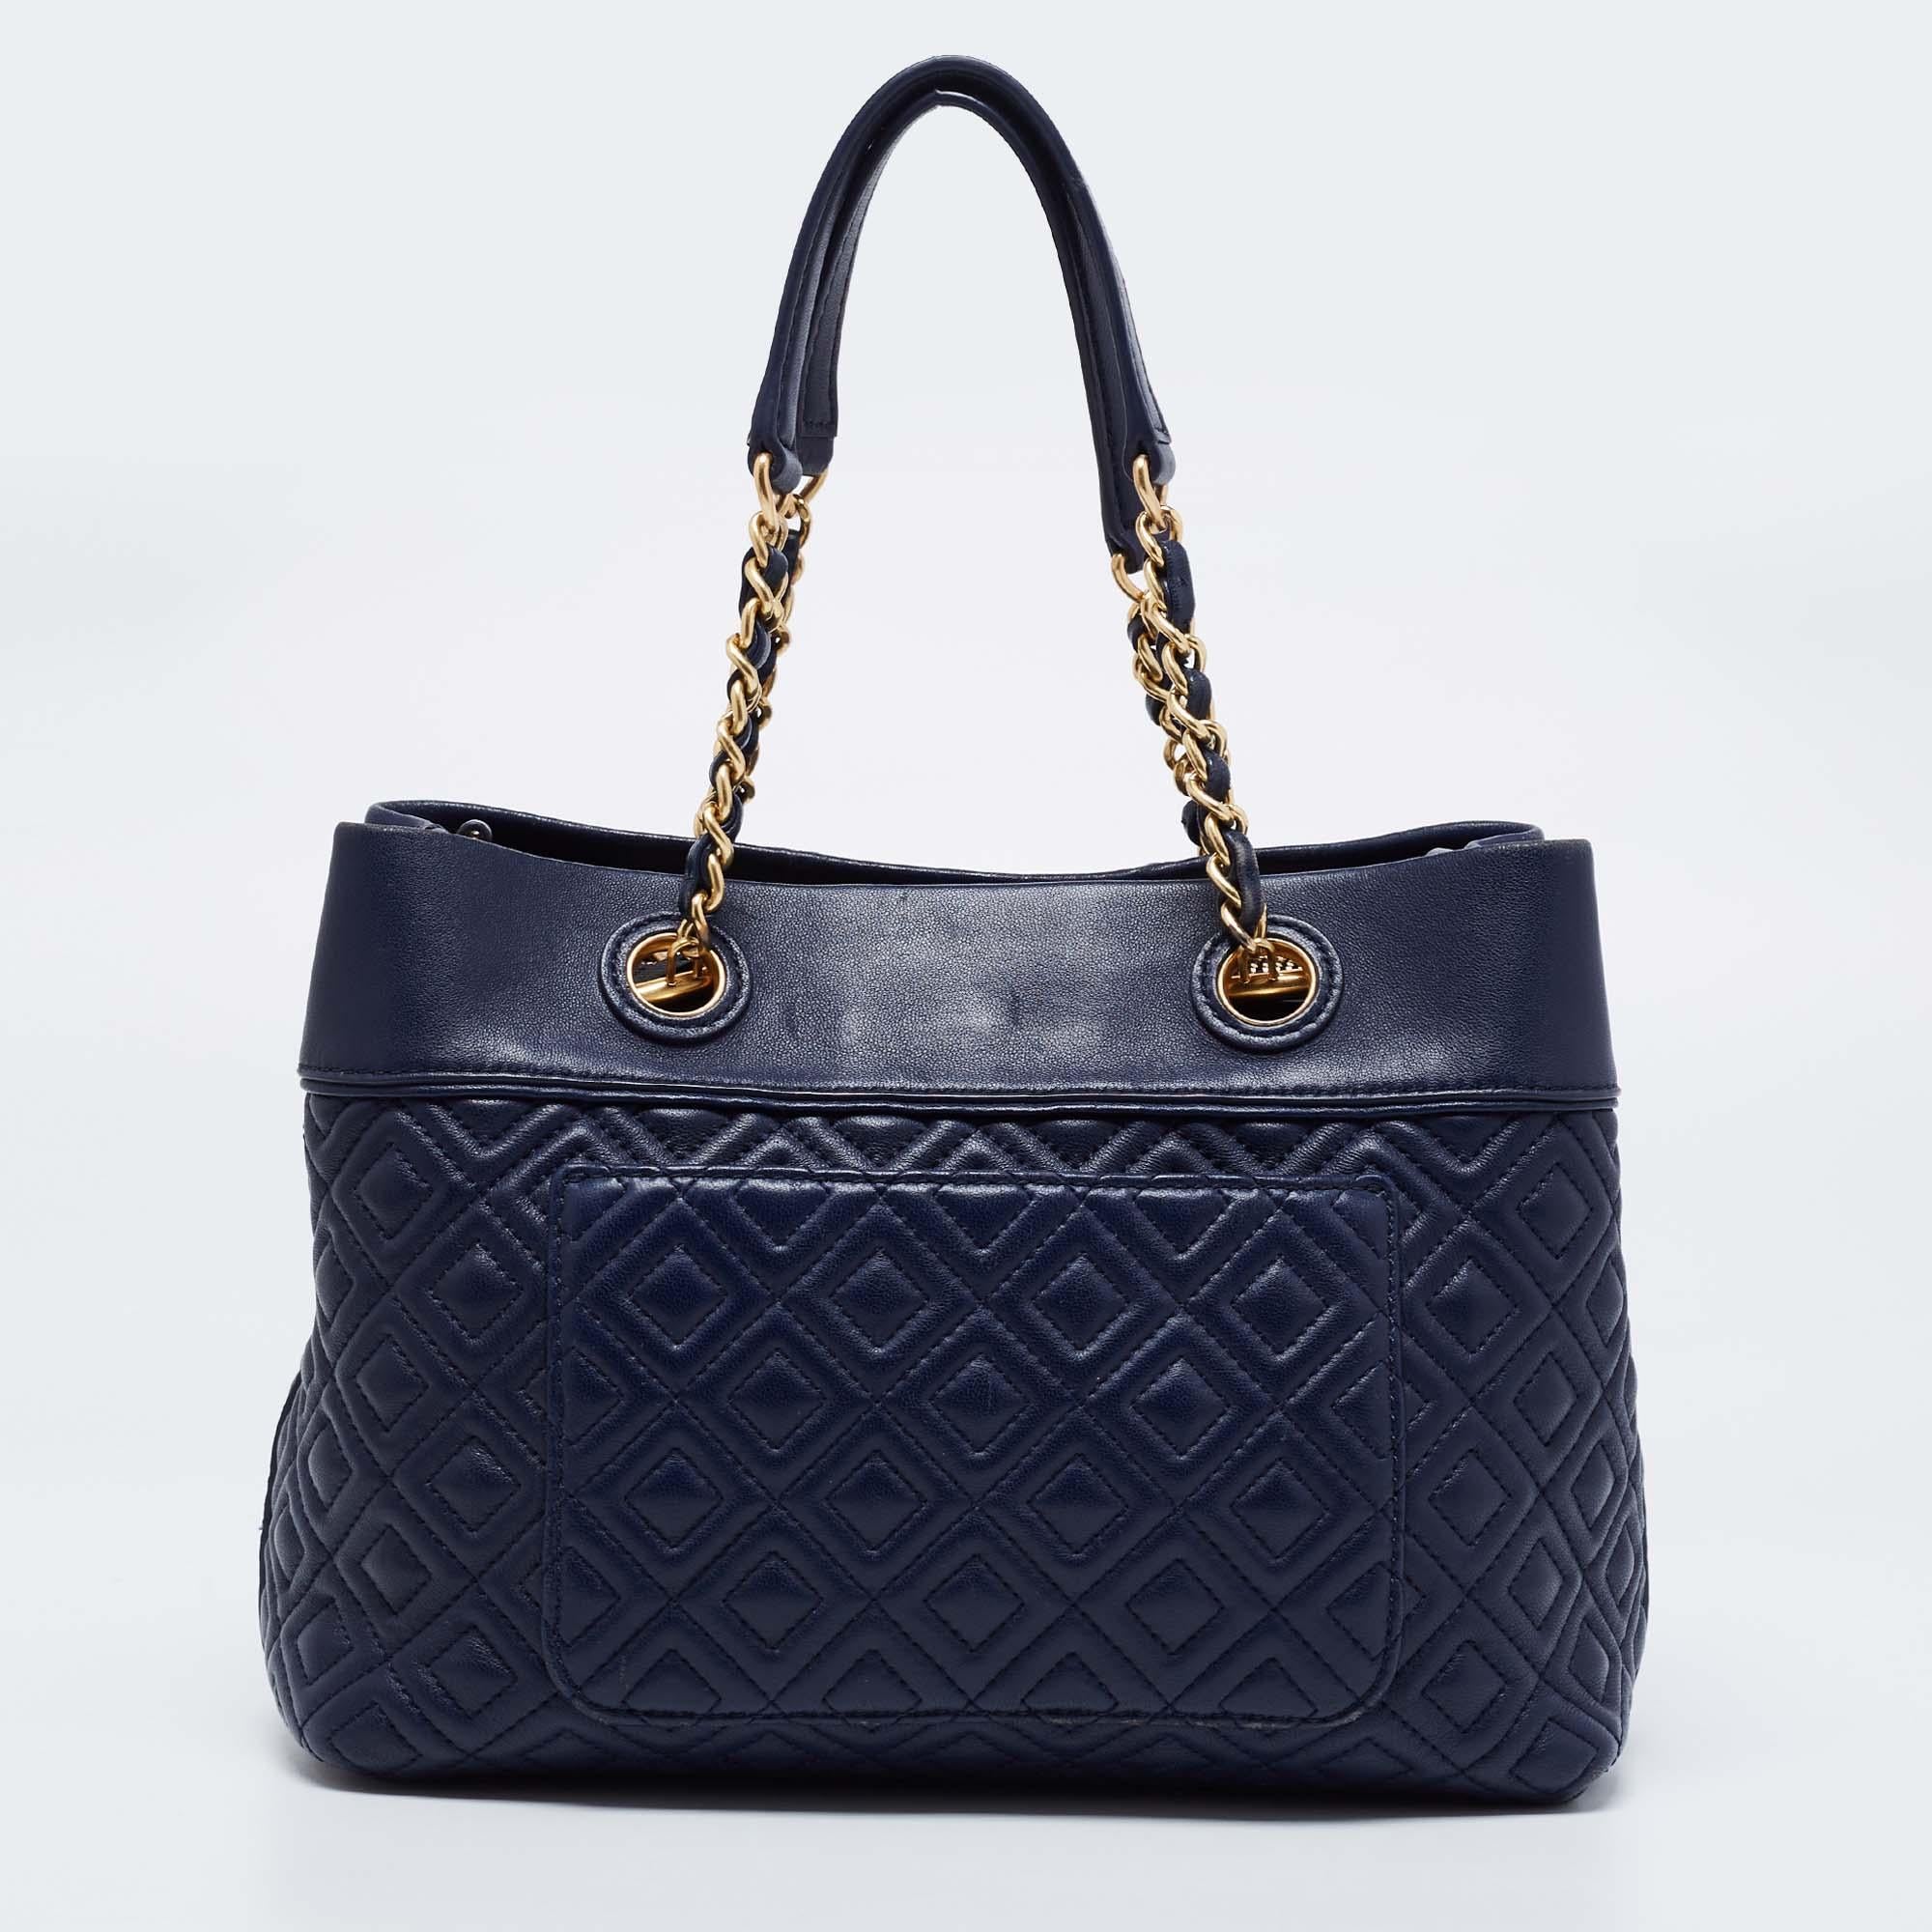 This Fleming tote from Tory Burch has been meticulously crafted from leather in a classy blue hue and designed with quilts in diamond patterns and the logo on the top. It has a fabric-lined interior, shoulder handles, and an ooptional strap. This is